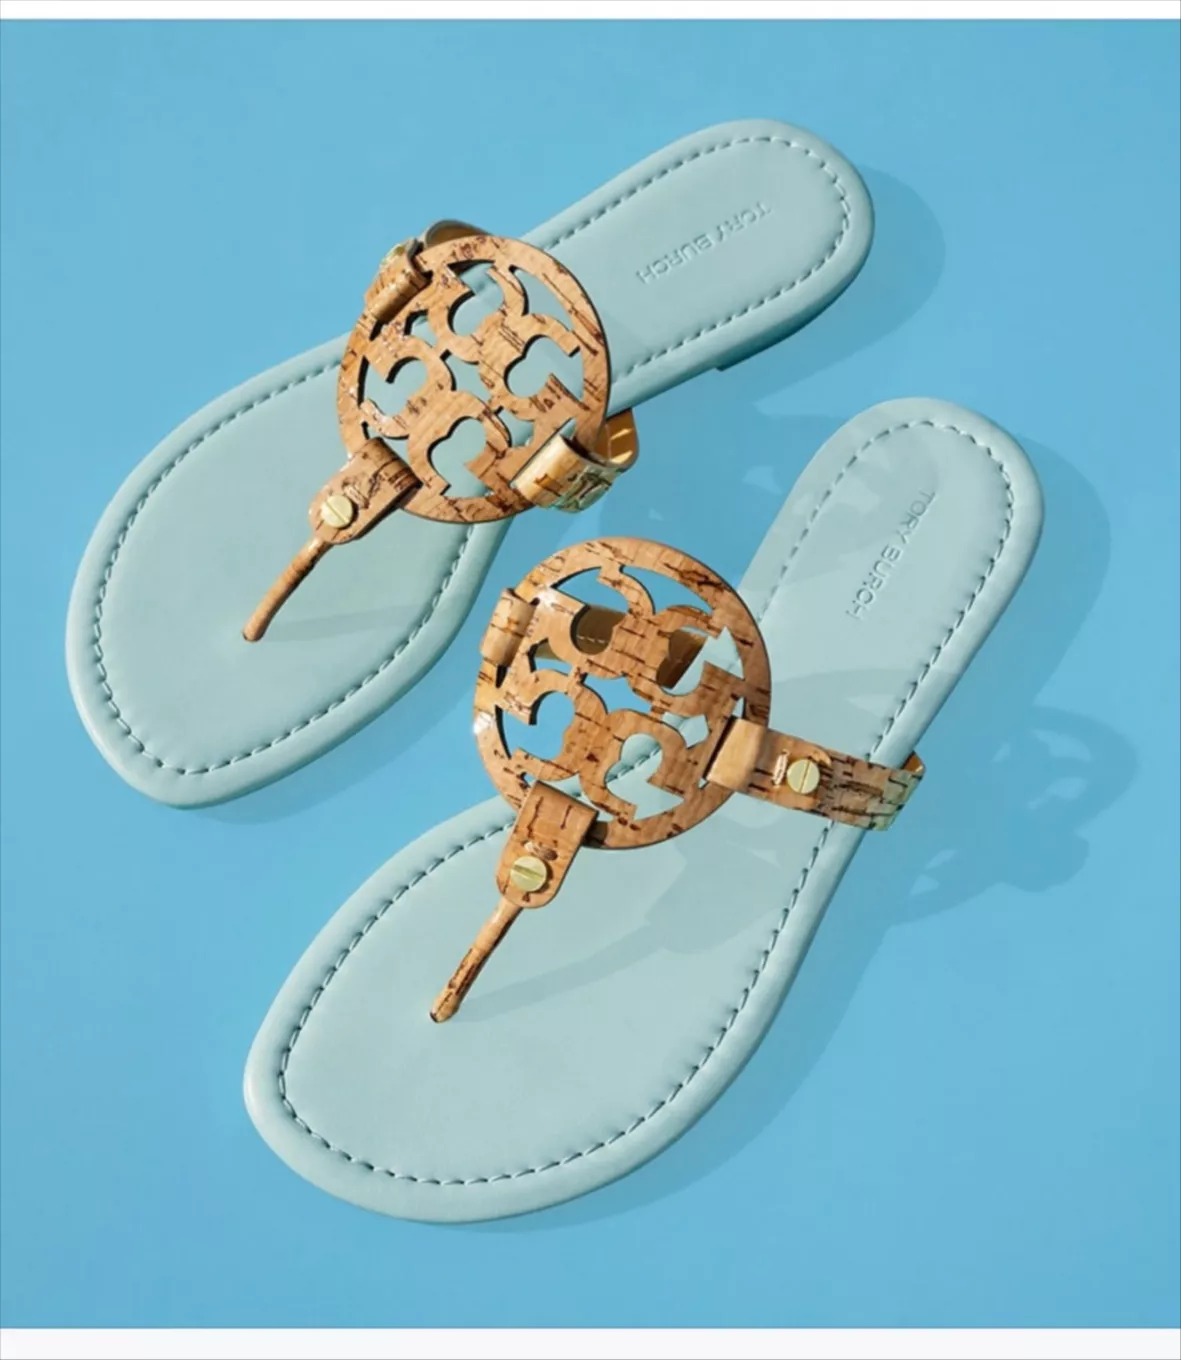 MILLER PATENT SANDAL curated on LTK